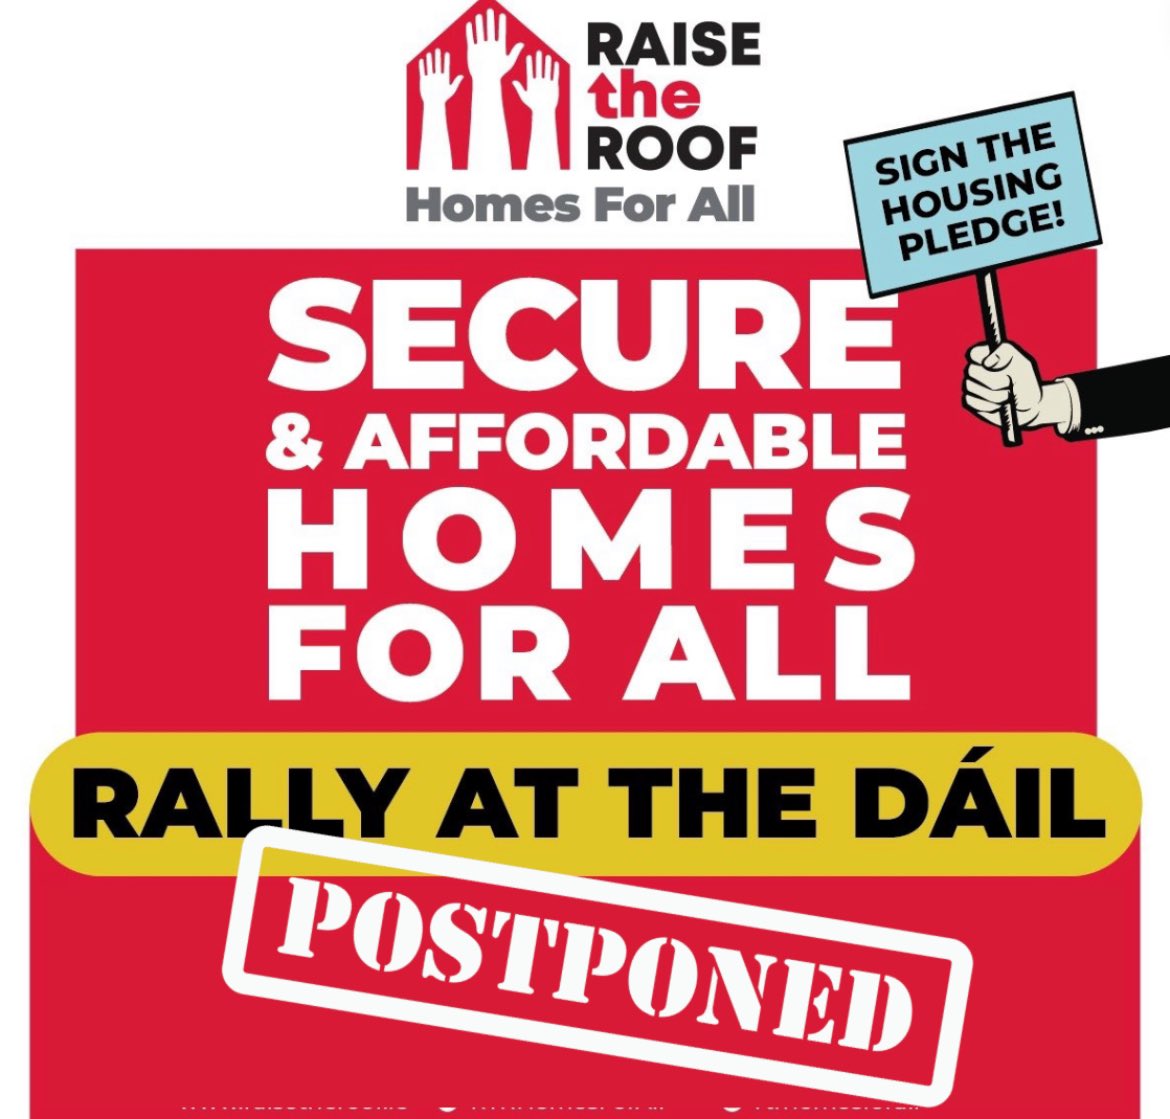 We are no longer in a position to proceed with the planned April 23 Rally at the Dáil, for reasons beyond our control. The #RaisetheRoof network will meet next week to discuss next steps and more details will follow. @irishcongress